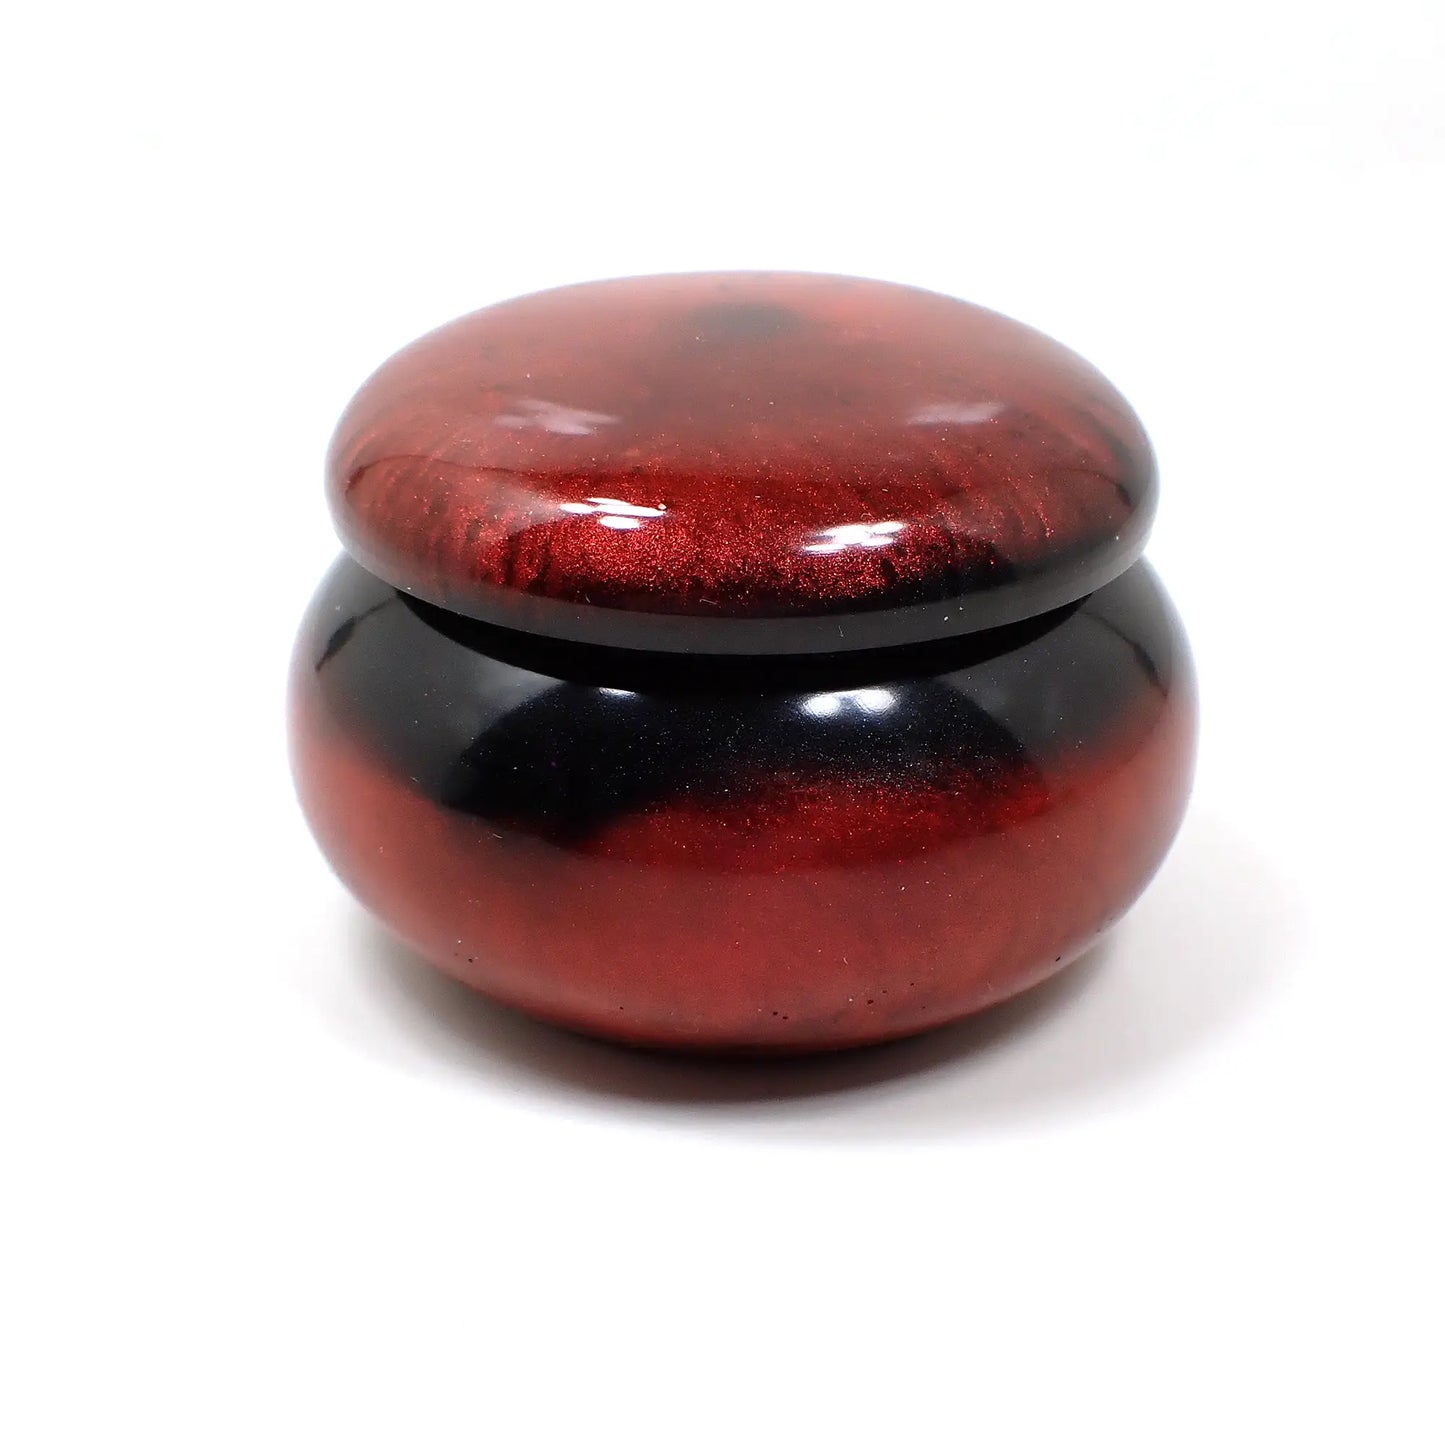 Small Handmade Goth Pearly Black and Bright Red Resin Round Trinket Box